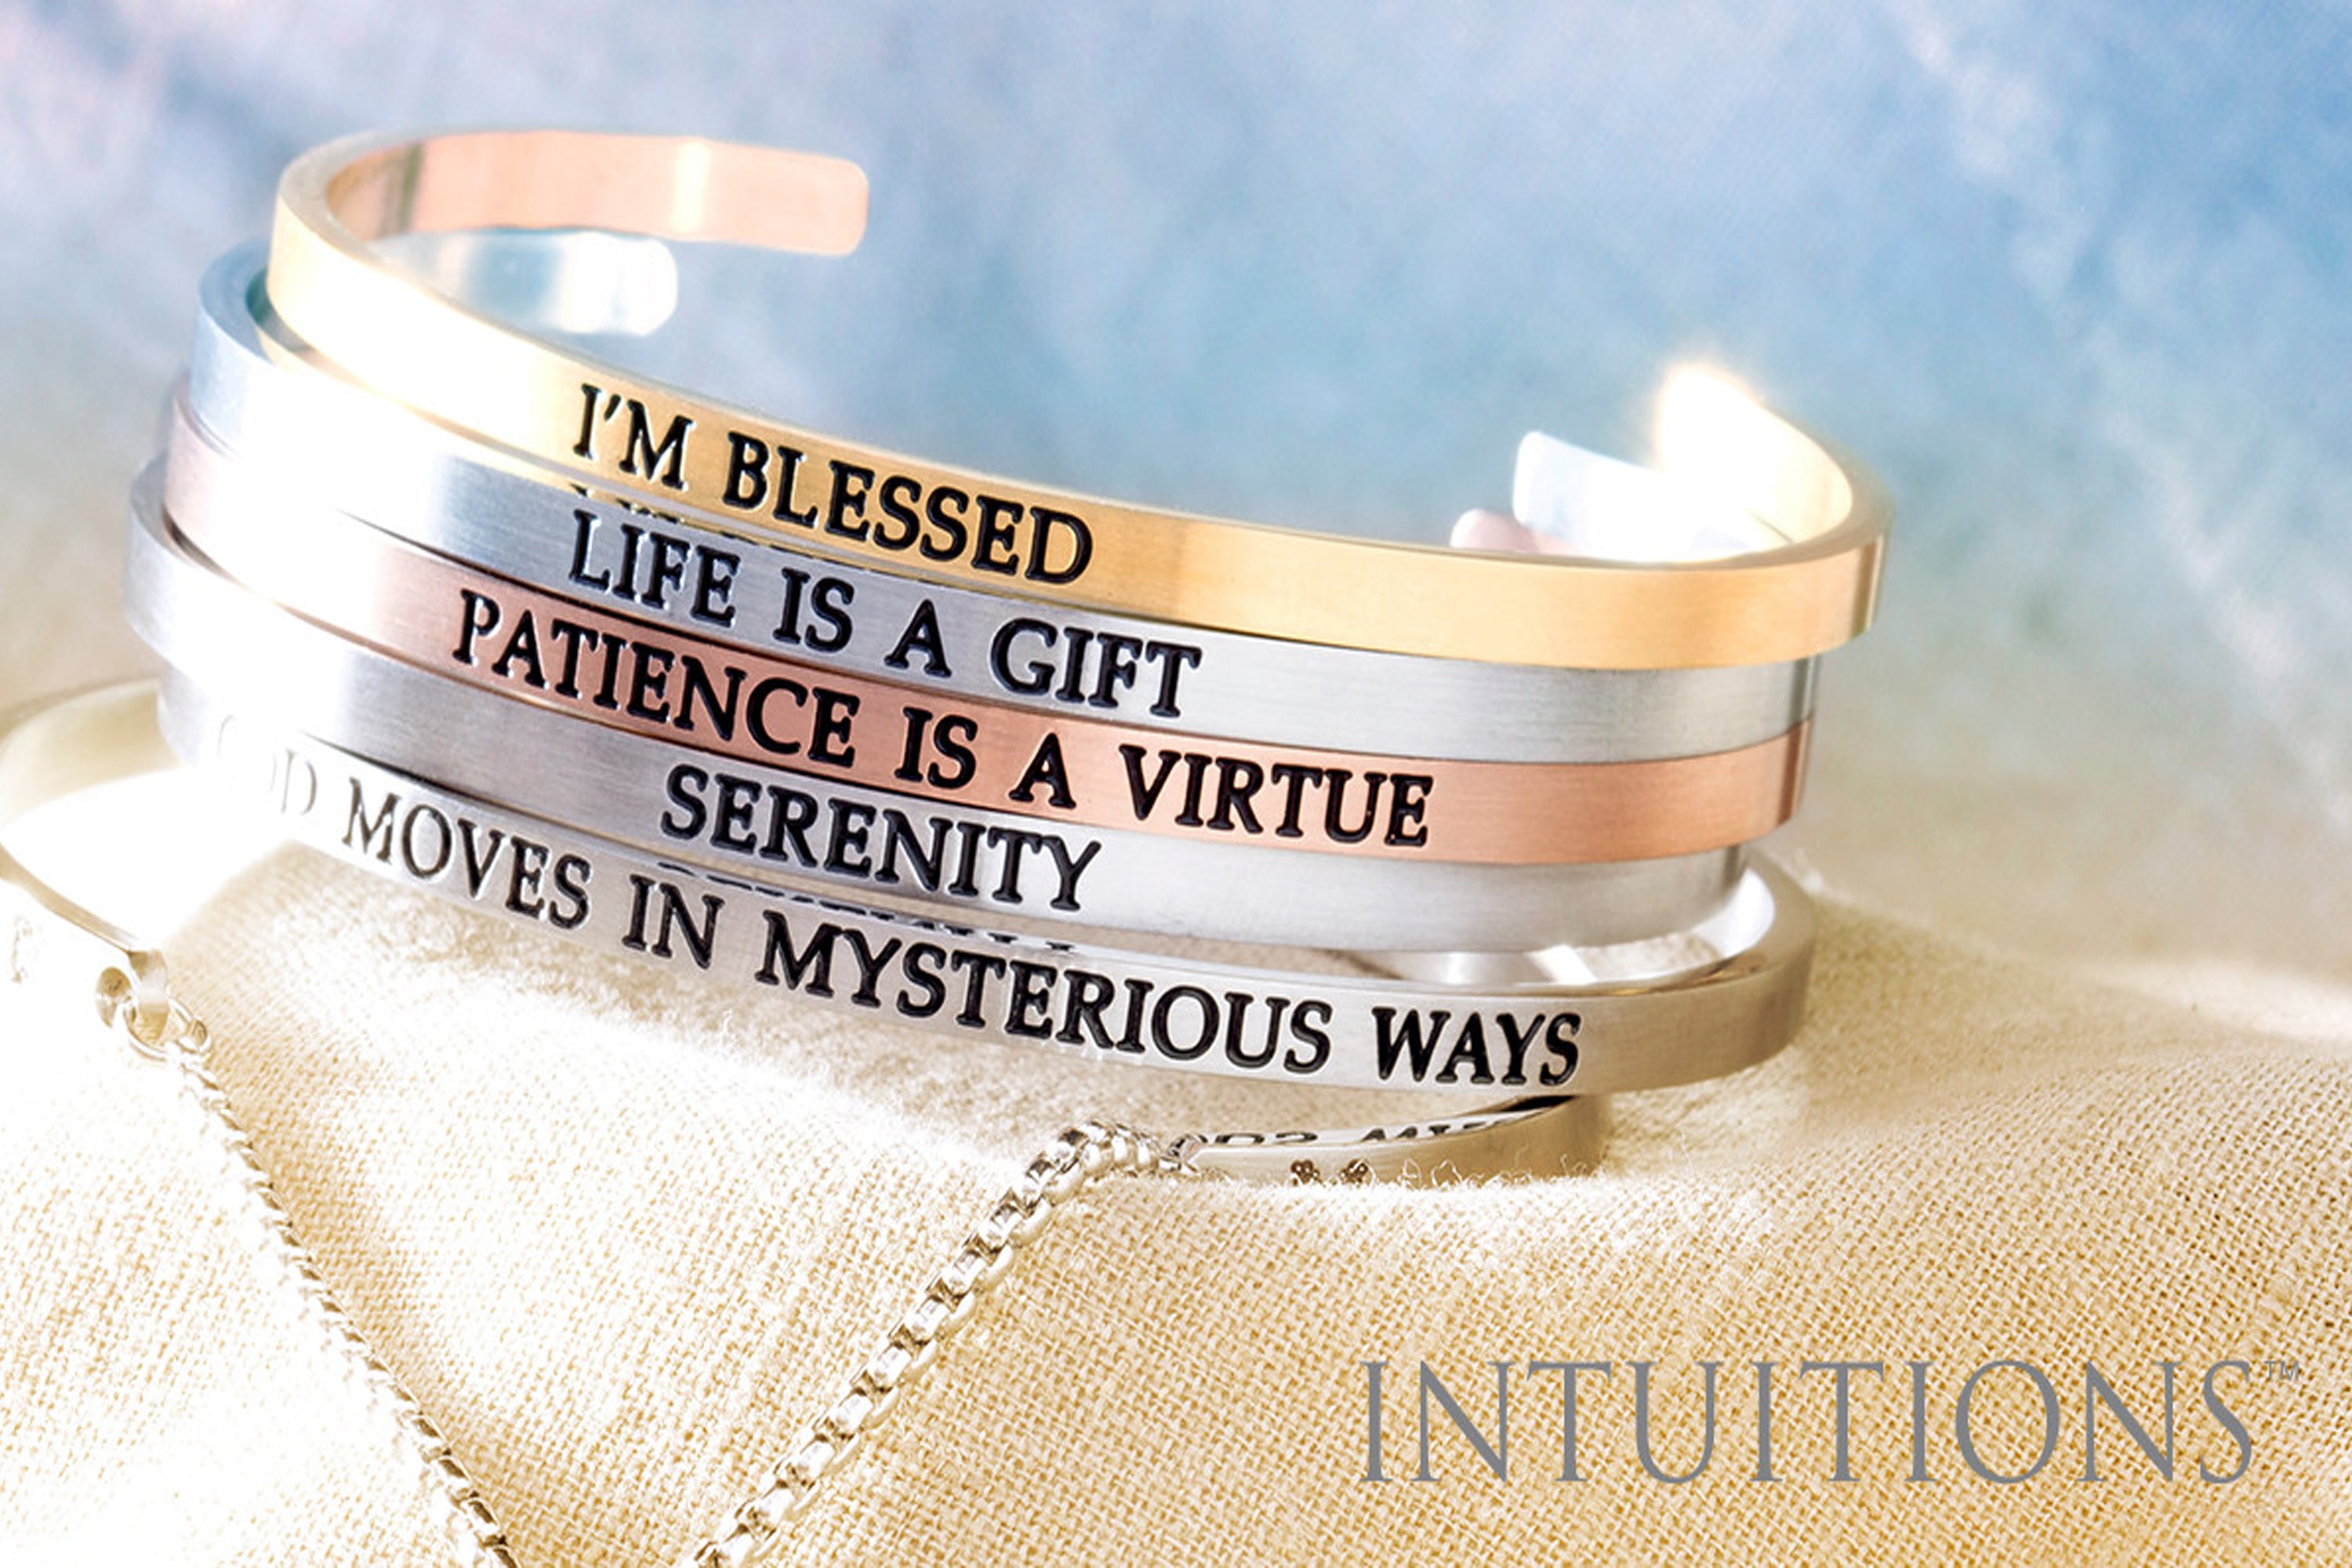 Intuitions Stainless Steel I LIVE BY FAITH Diamond Accent Adjustable Bracelet